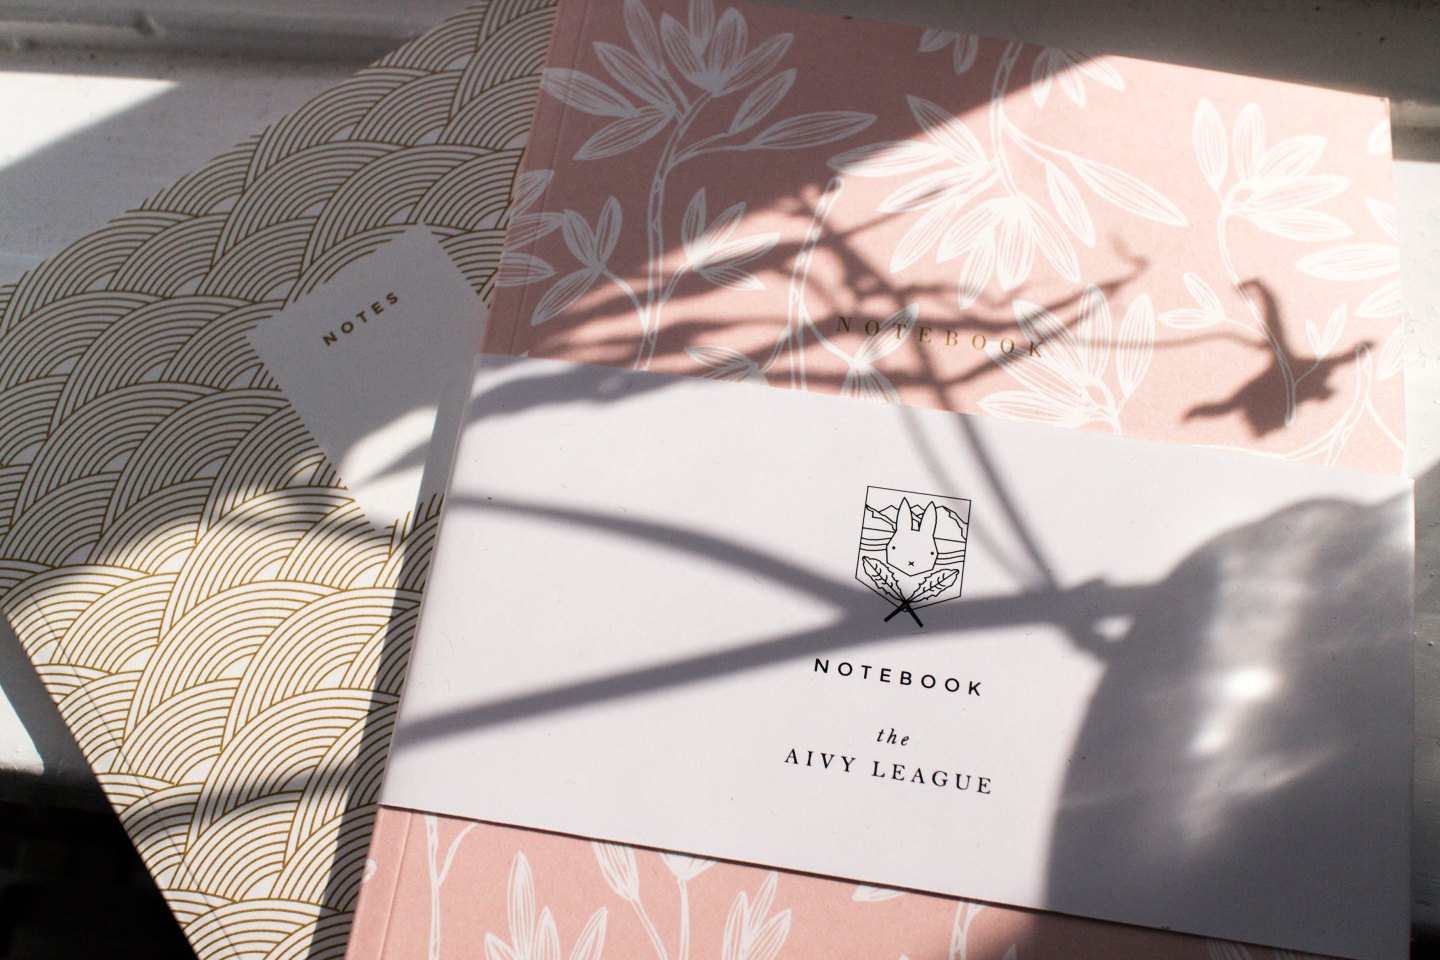 IHEARTALICE – Fashion & Travel Blog from Berlin/Germany by Alice M. Huynh: The Aivy League – Stationary, Gift Wrapping, Notebooks / The Spring Blossom Collection